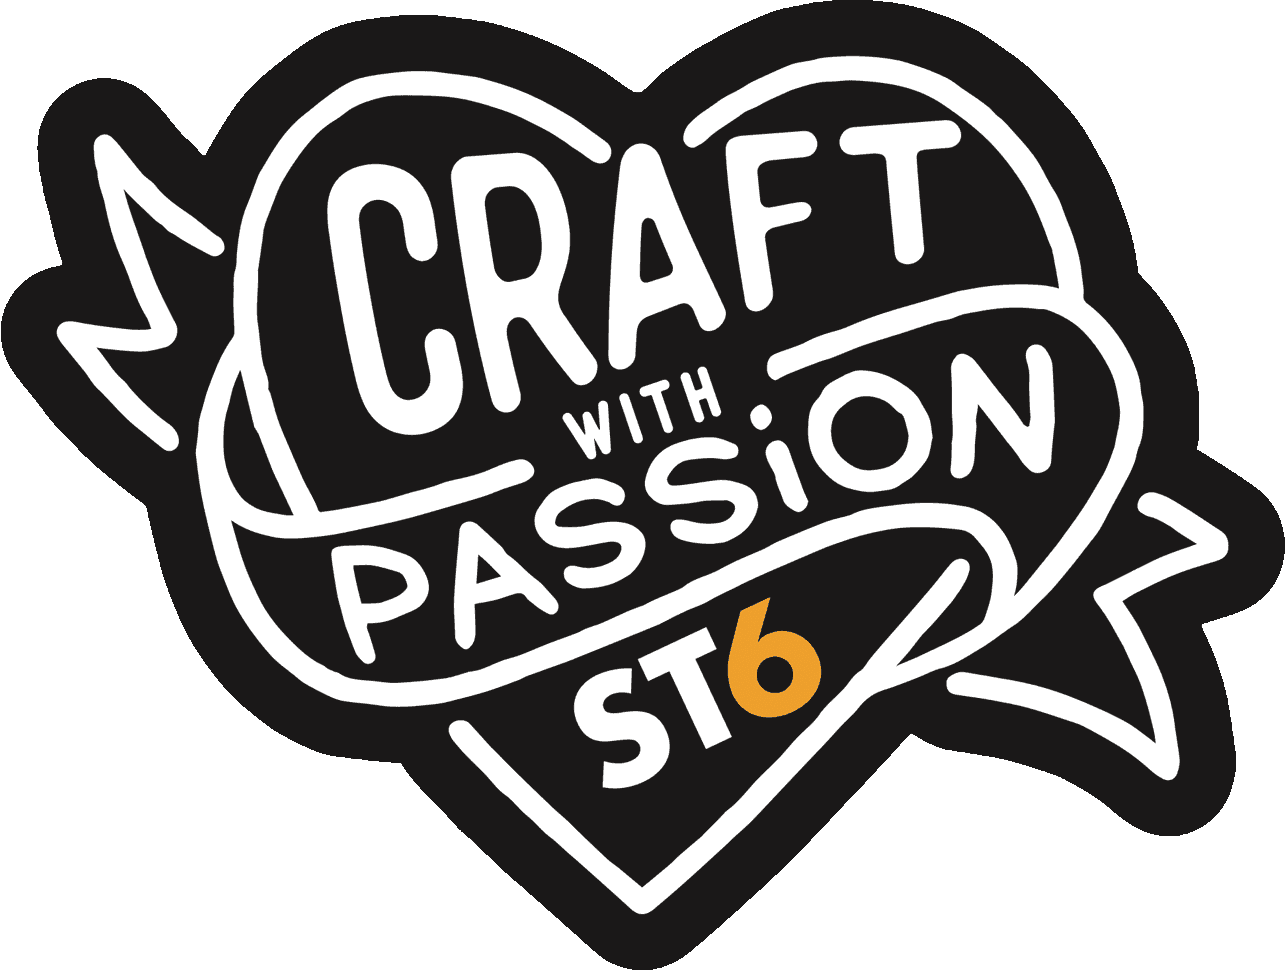 Craft with passion